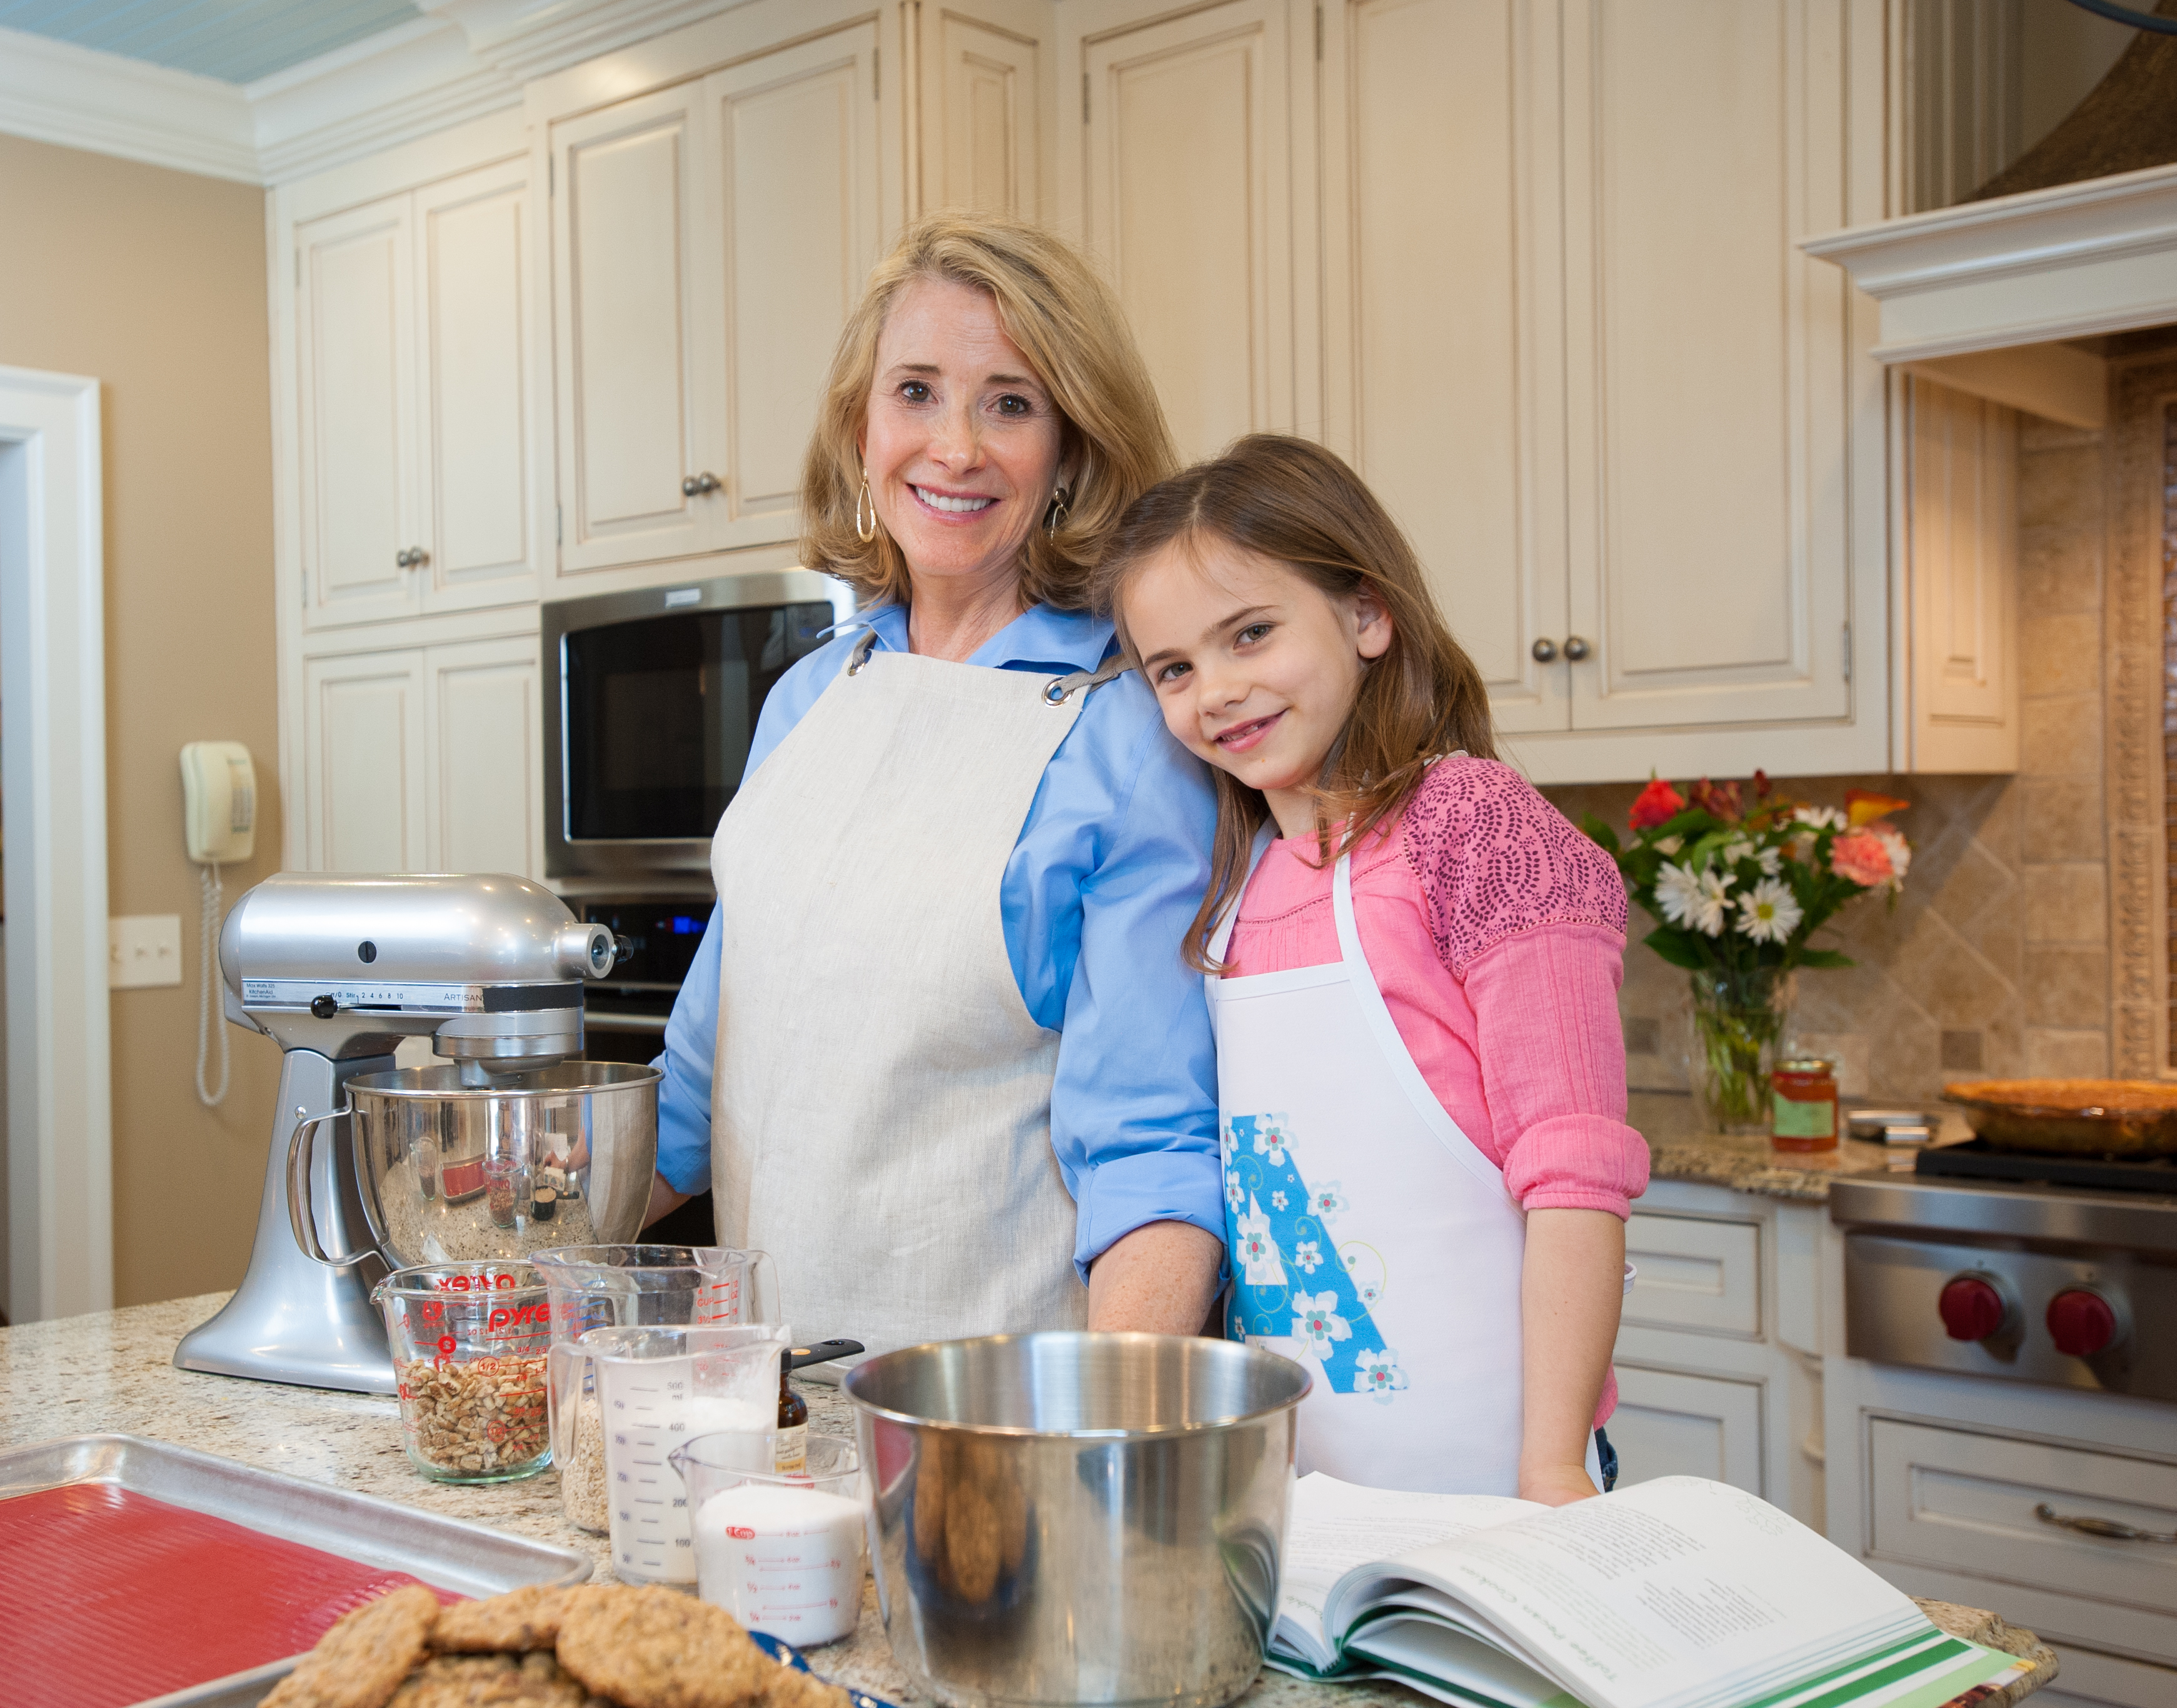 Mary Pearson baking with granddaughter Adeline